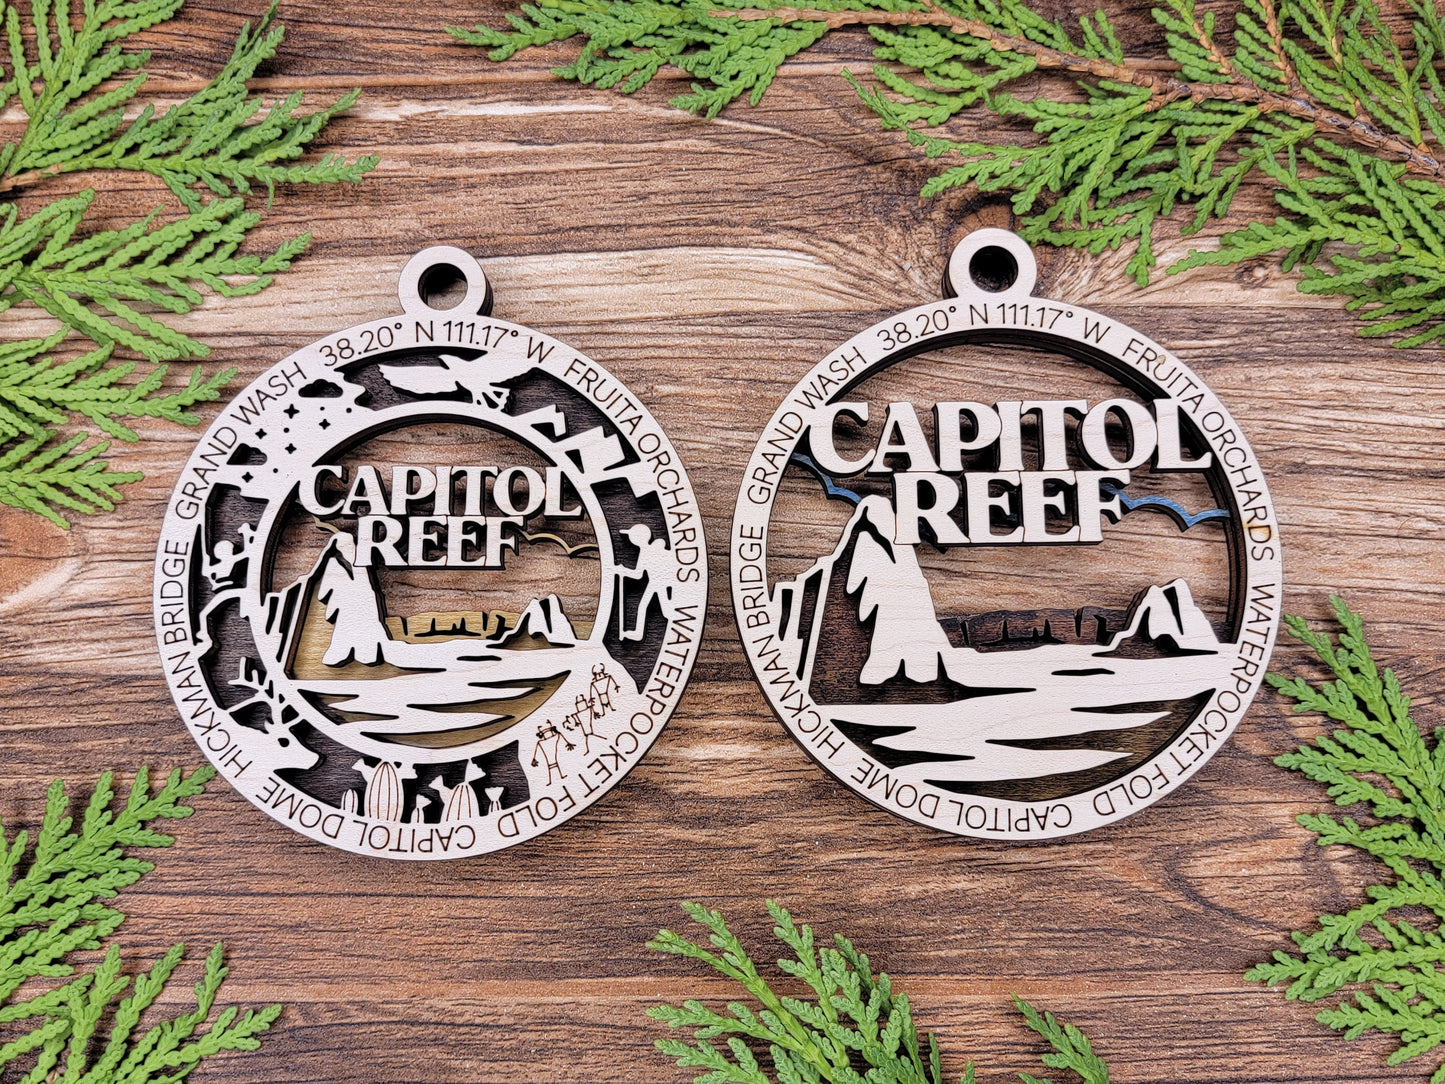 Capitol Reef Park Ornament - Includes 2 Ornaments - Laser Design SVG, PDF, AI File Download - Tested On Glowforge and LightBurn